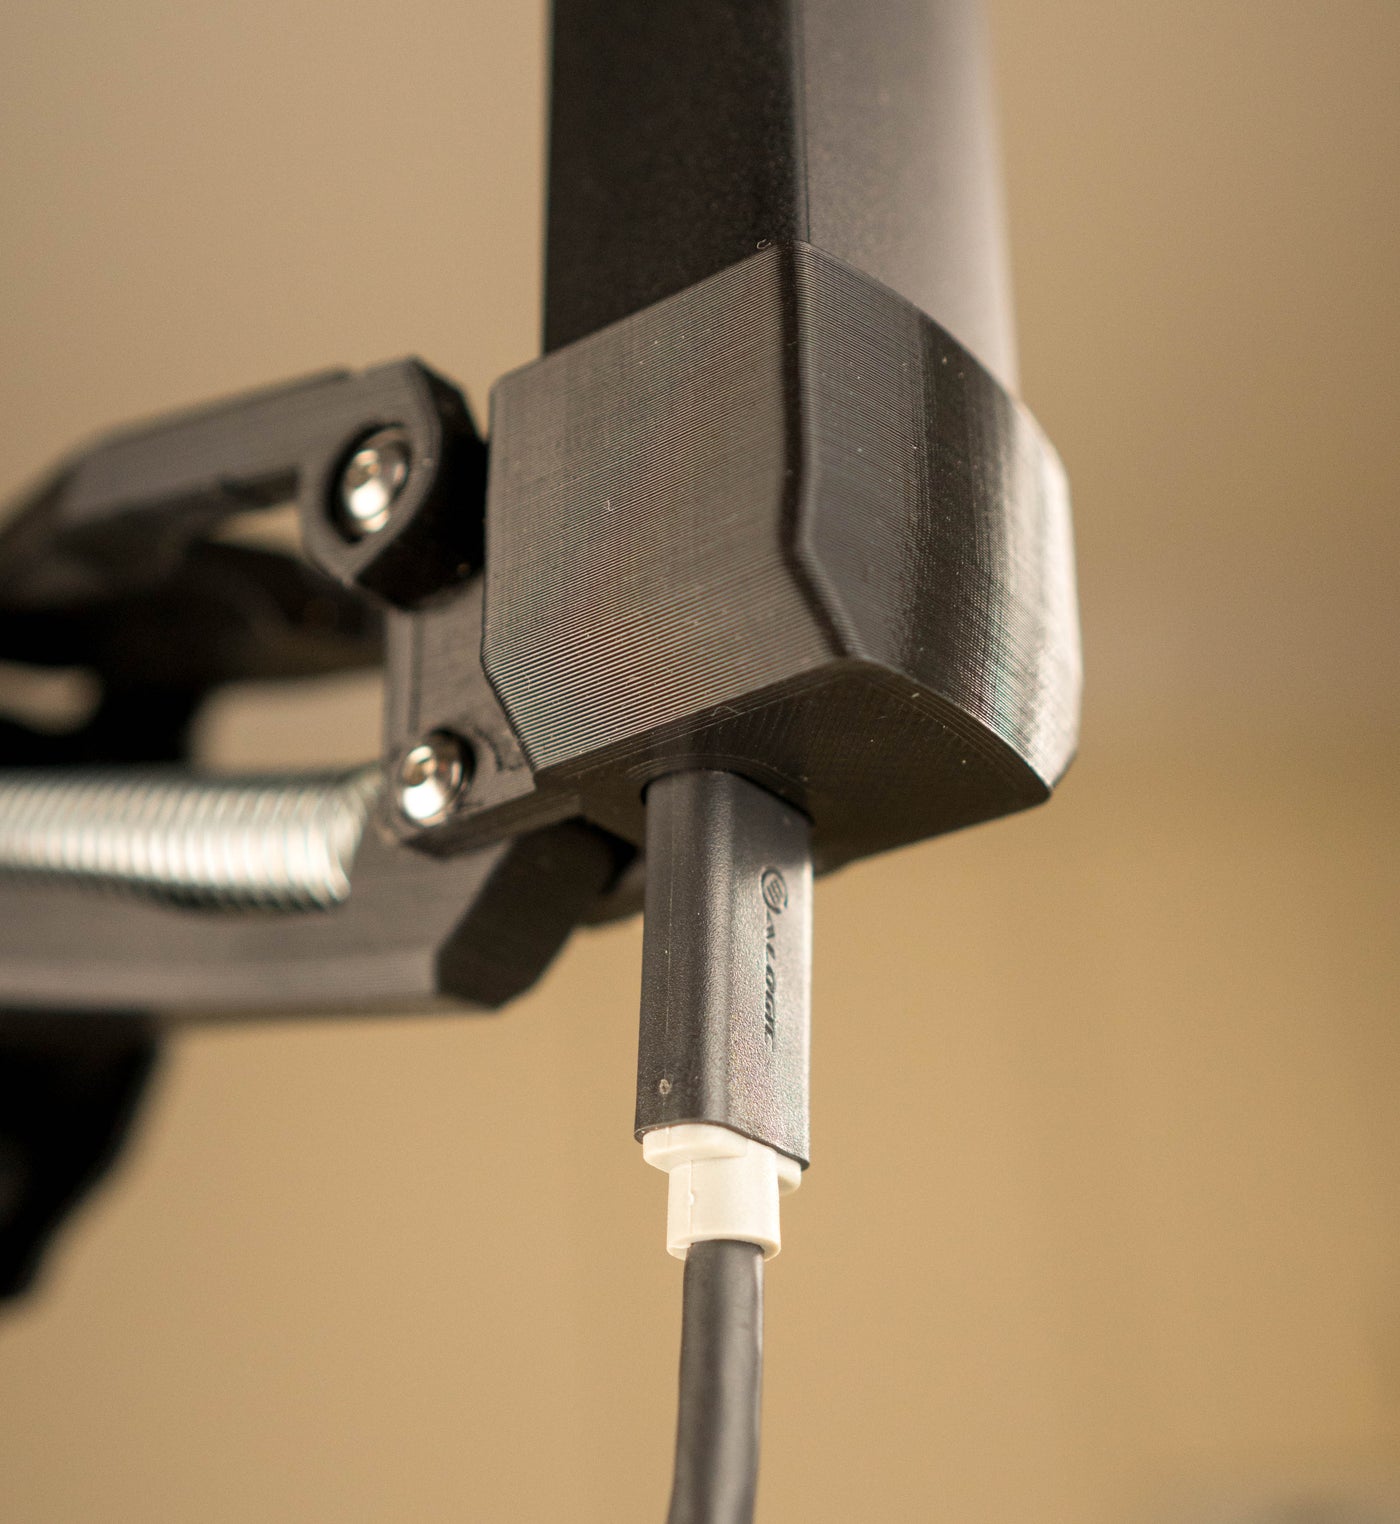 Osmo Pocket 1 Micro 4th Axis with Handle - ScottyMakesStuff